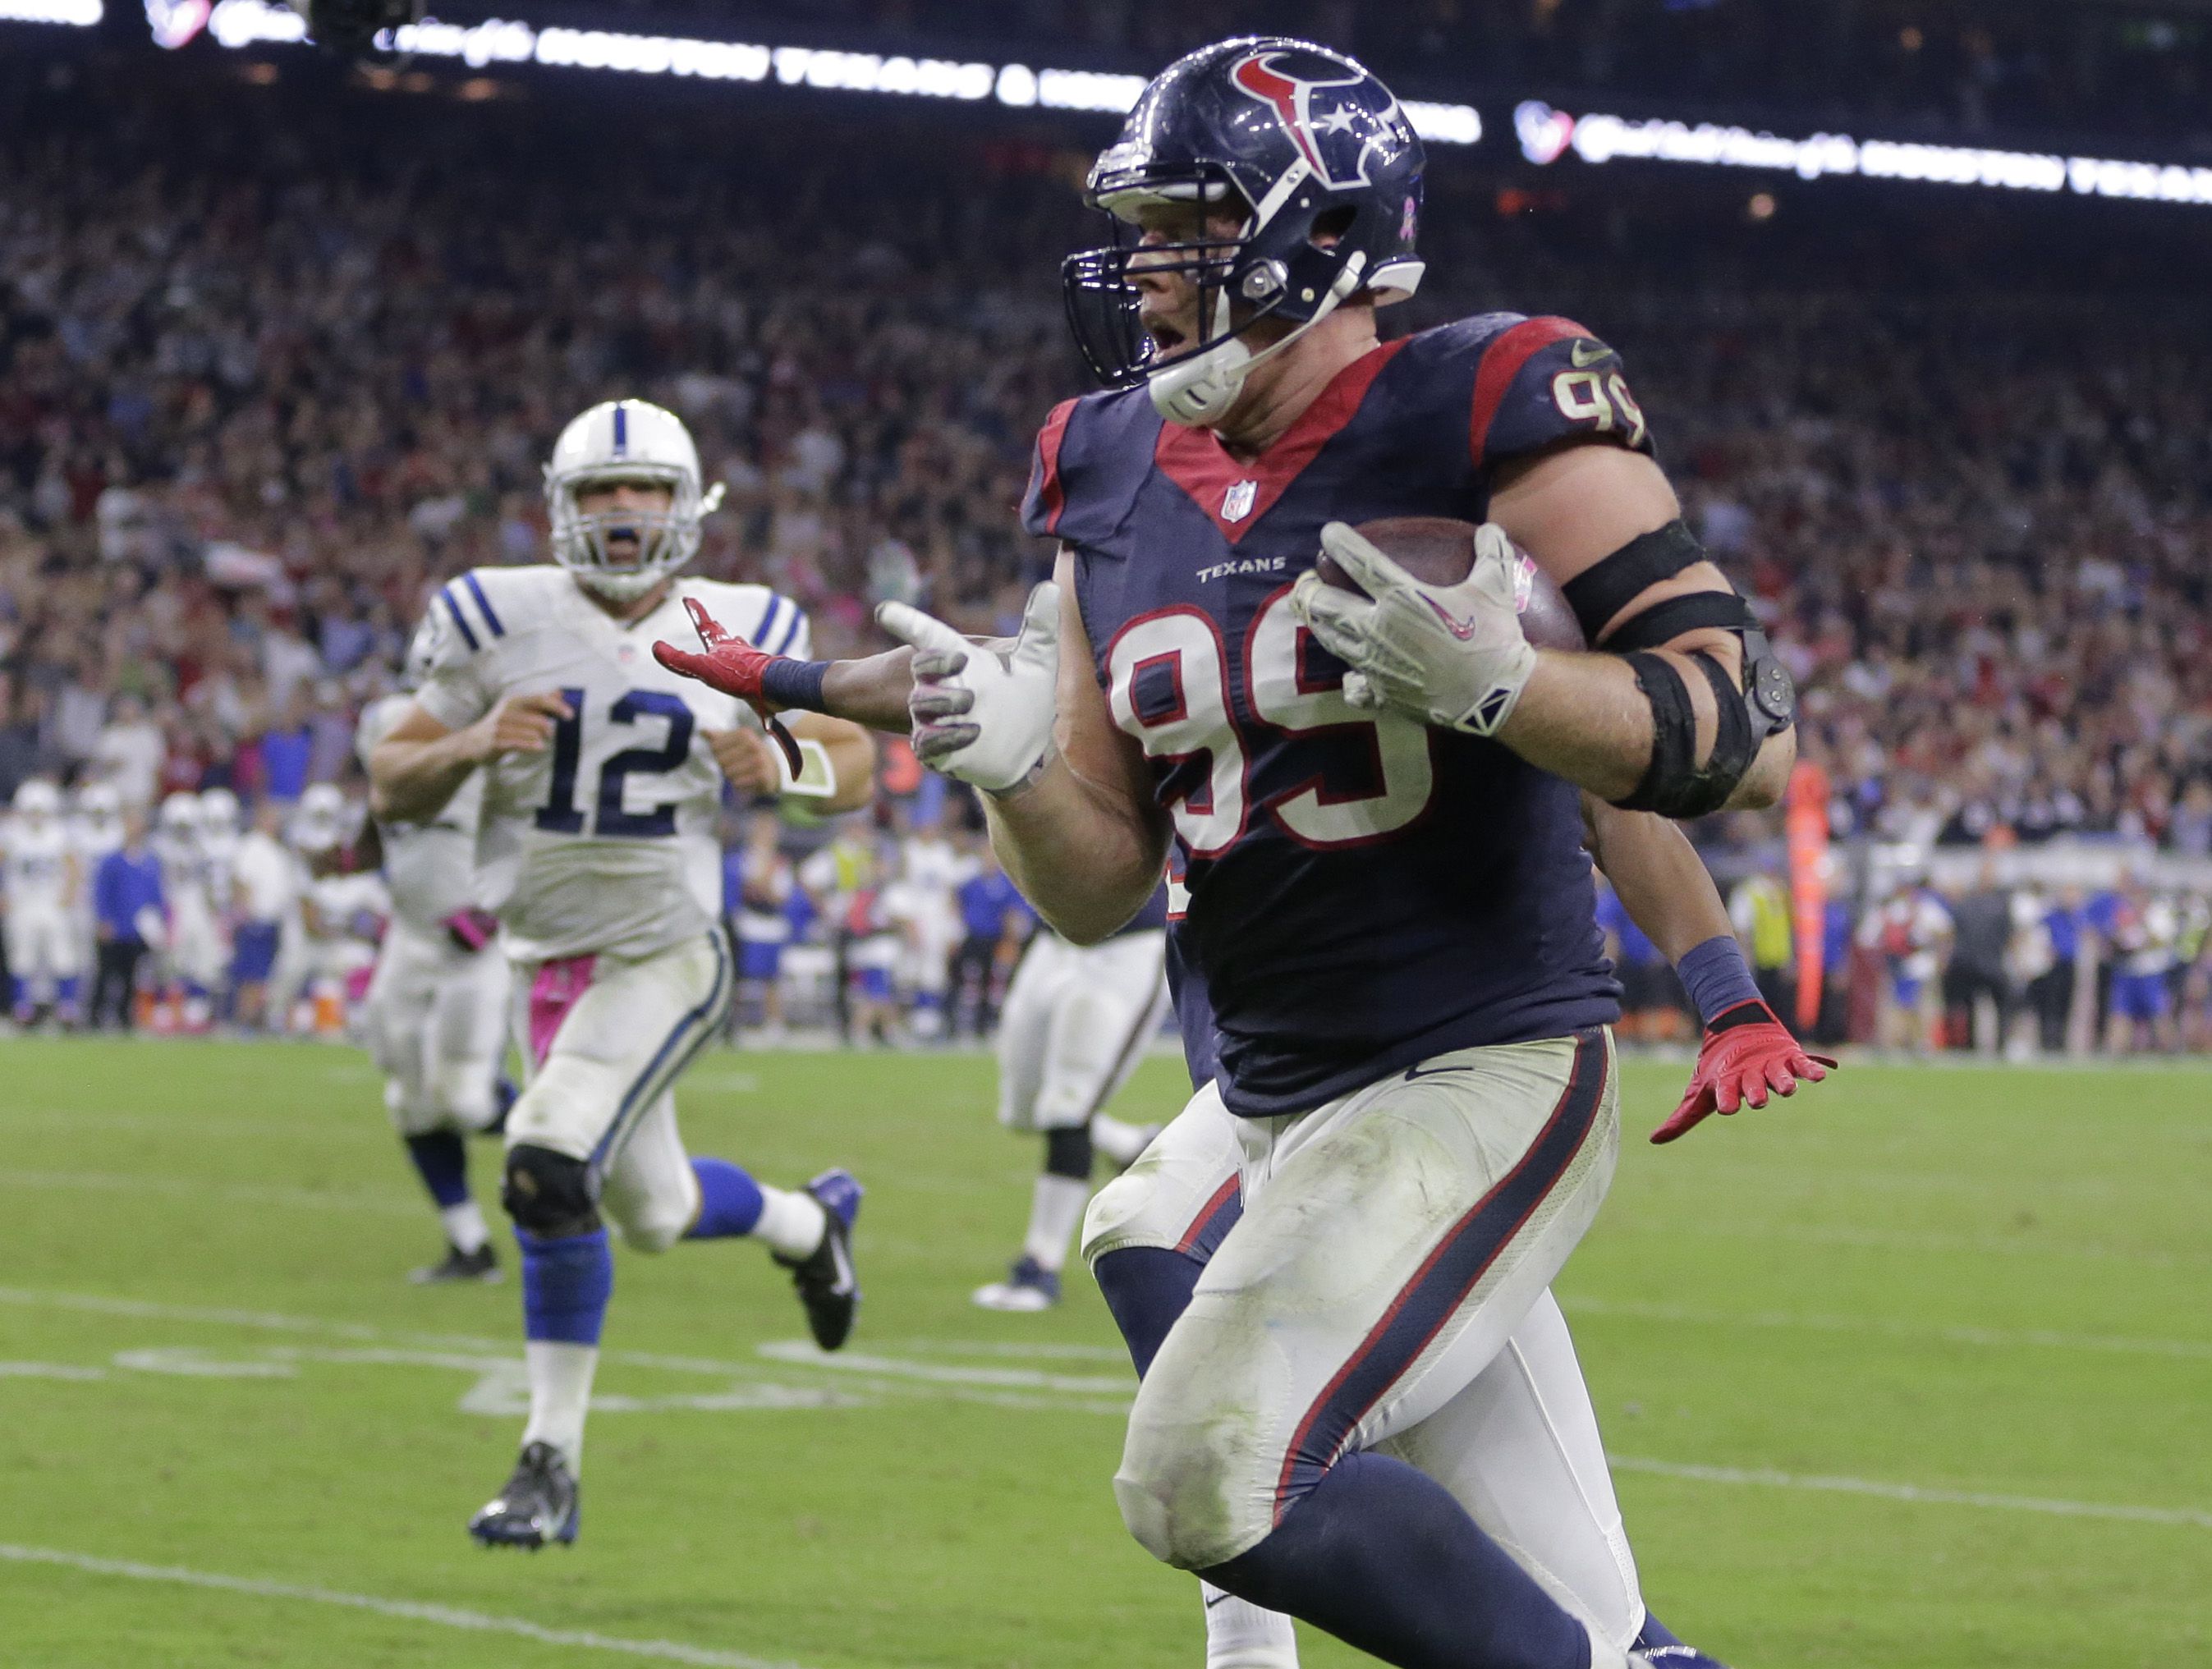 Watt can put a stop to the Colts’ Luck